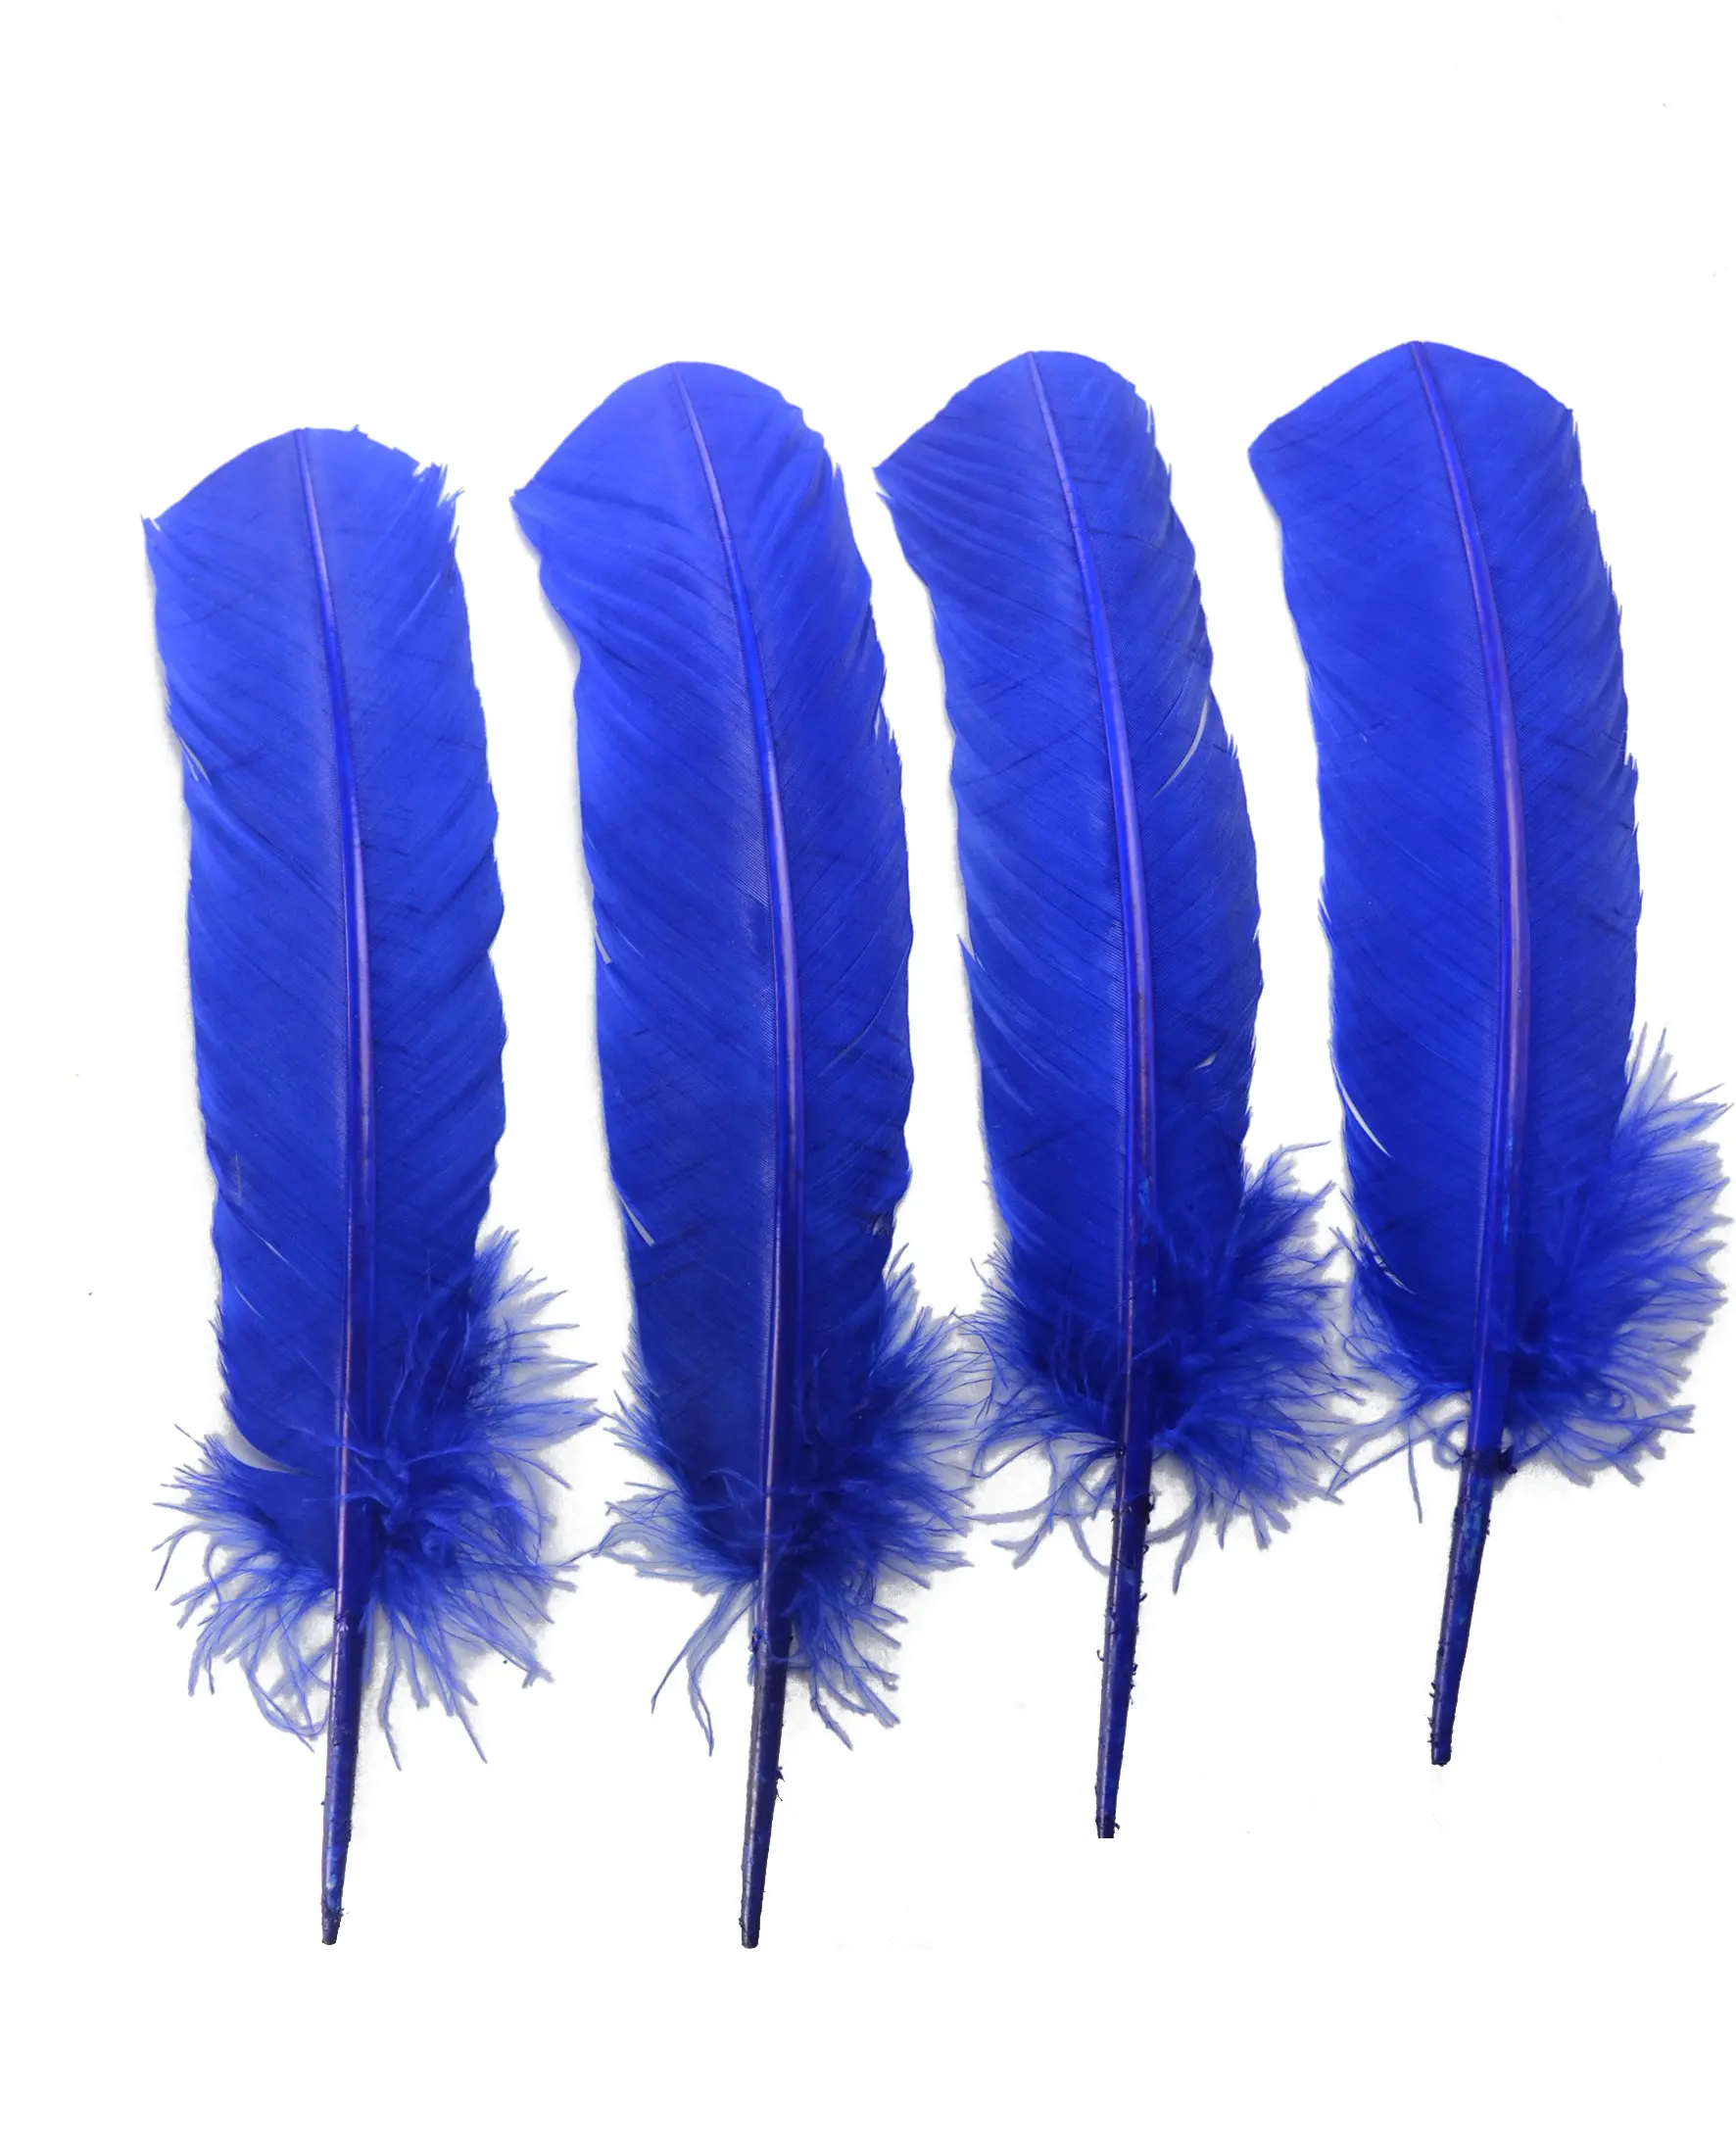 25-30 cm Natural Washed Bleached Blue Turkey Round Wing Quill Dyed Turkey Feather For DIY Craft Costume Headdress Angle Wing